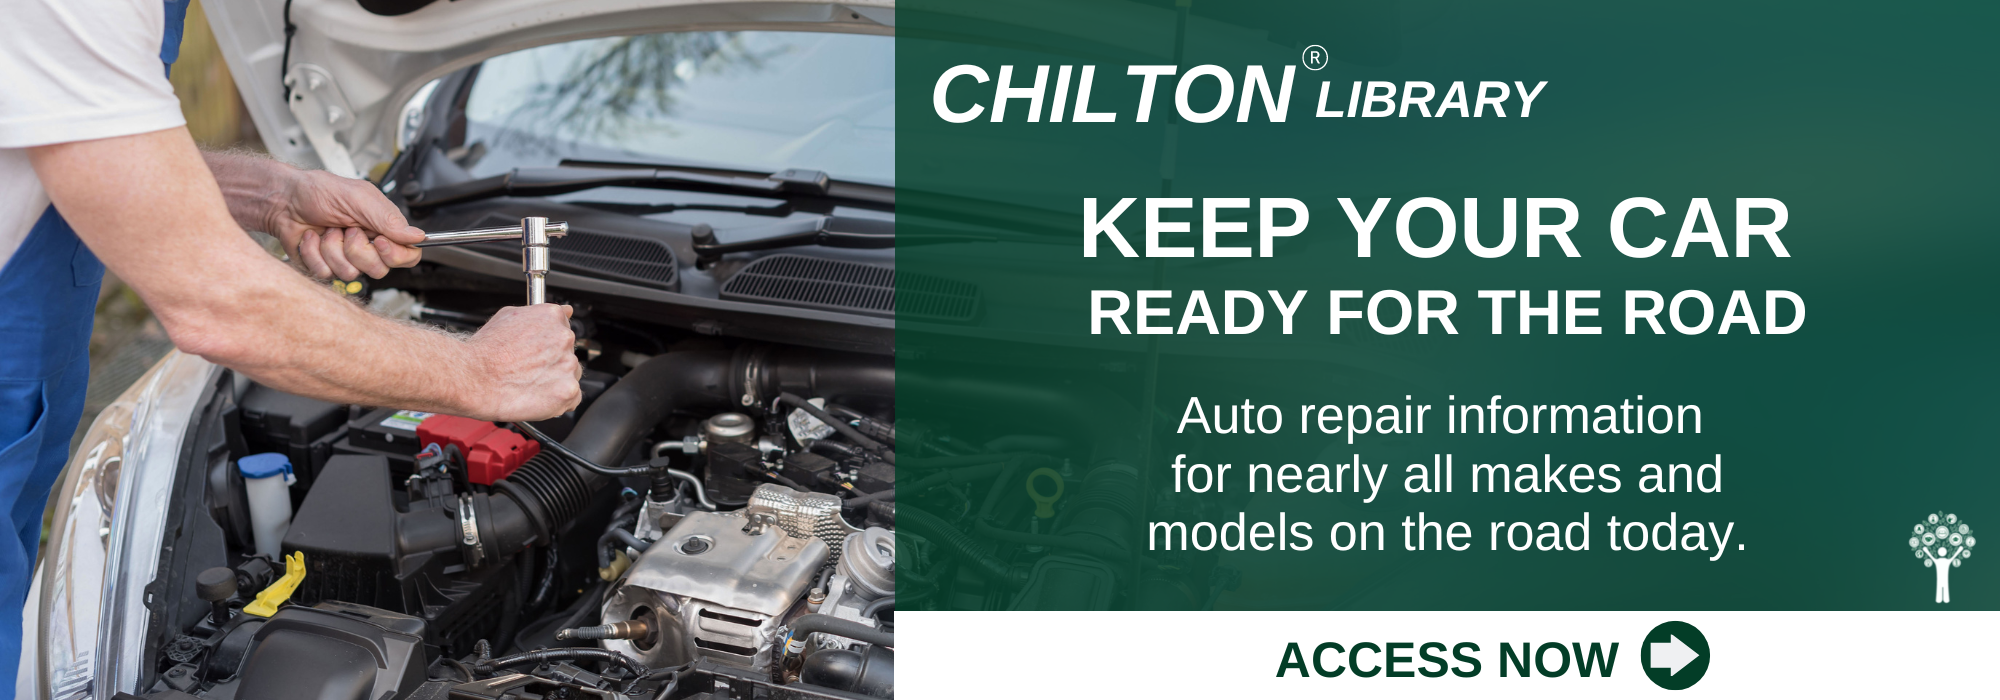 Chilton Library Car Repair and Maintenance Resources